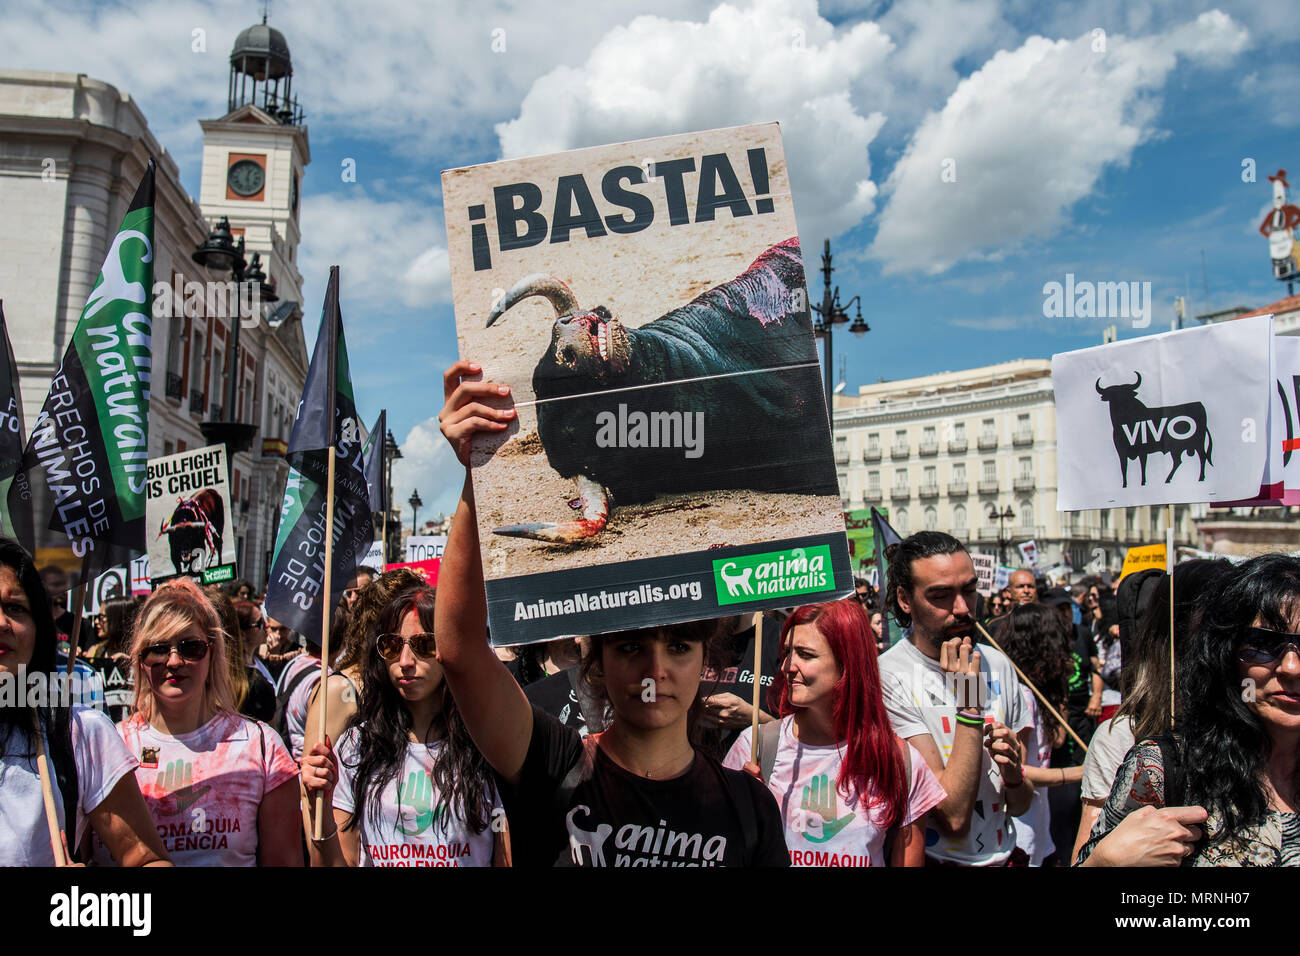 Madrid, Spain. 27th May, 2018. Anti-bullfighting protesters during a demonstration under the slogan 'Bullfighting is Violence' demanding to abolish bullfighting and animal suffering, in Madrid, Spain. Credit: Marcos del Mazo/Alamy Live News Stock Photo